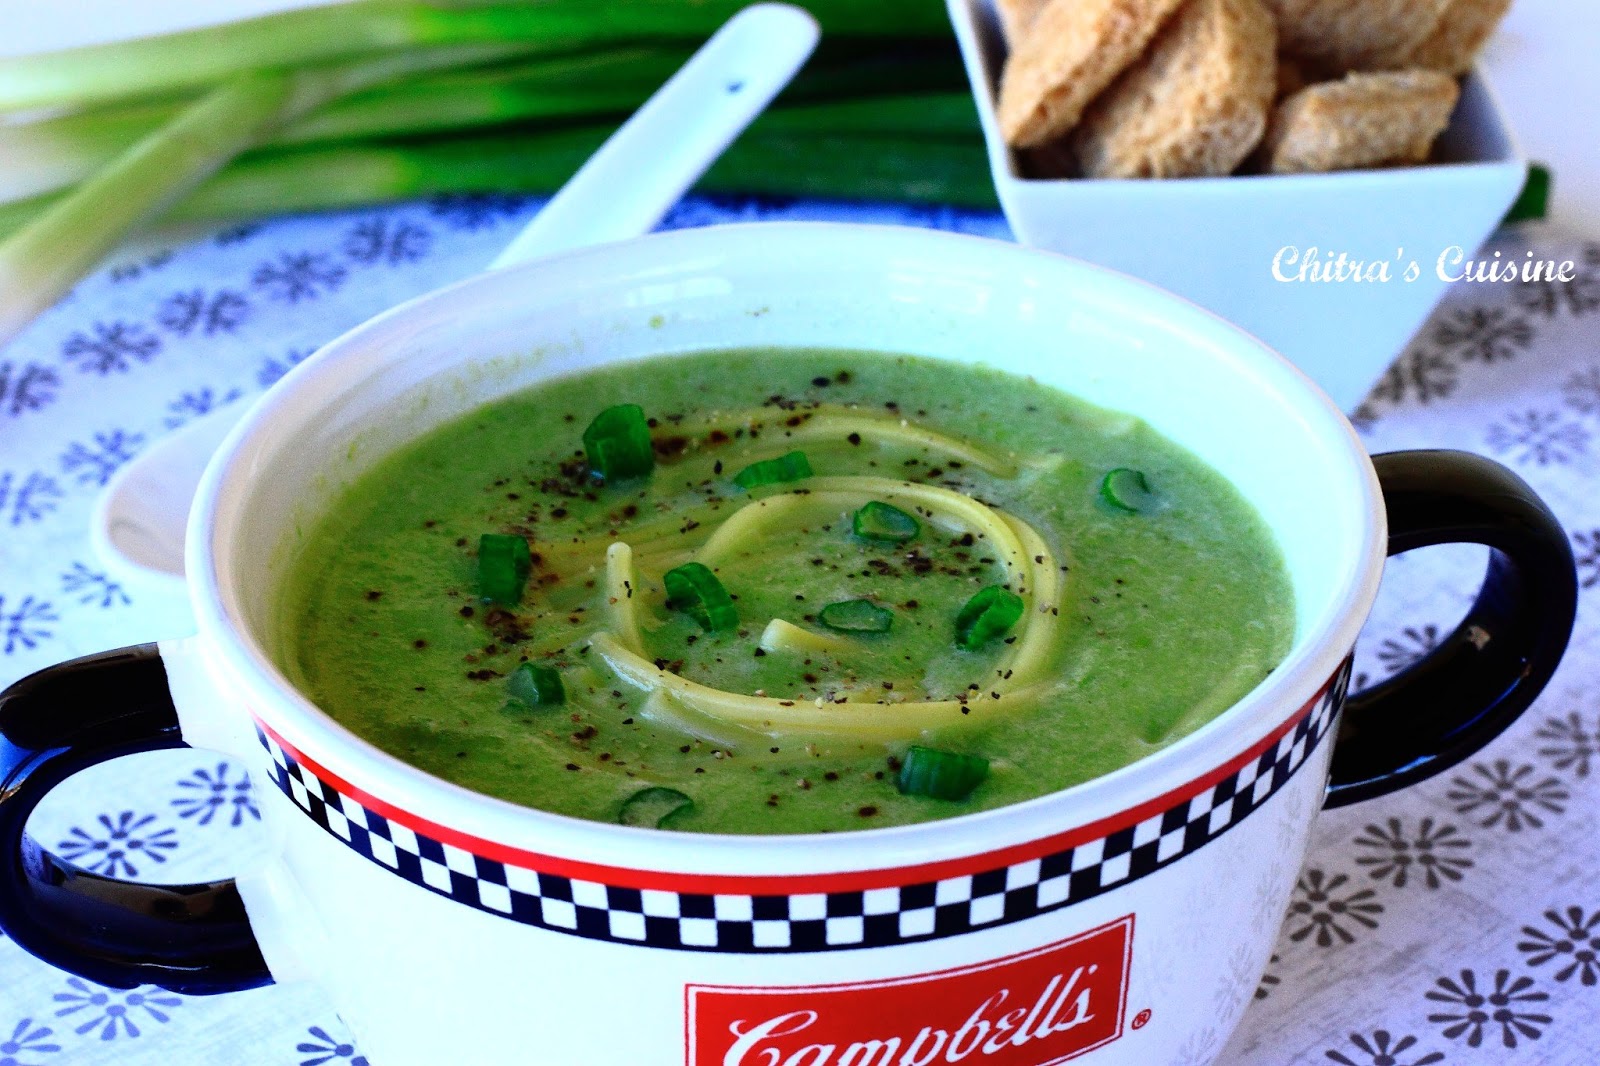 Chitra's Cuisine: Spring Onion and Spaghetti Soup